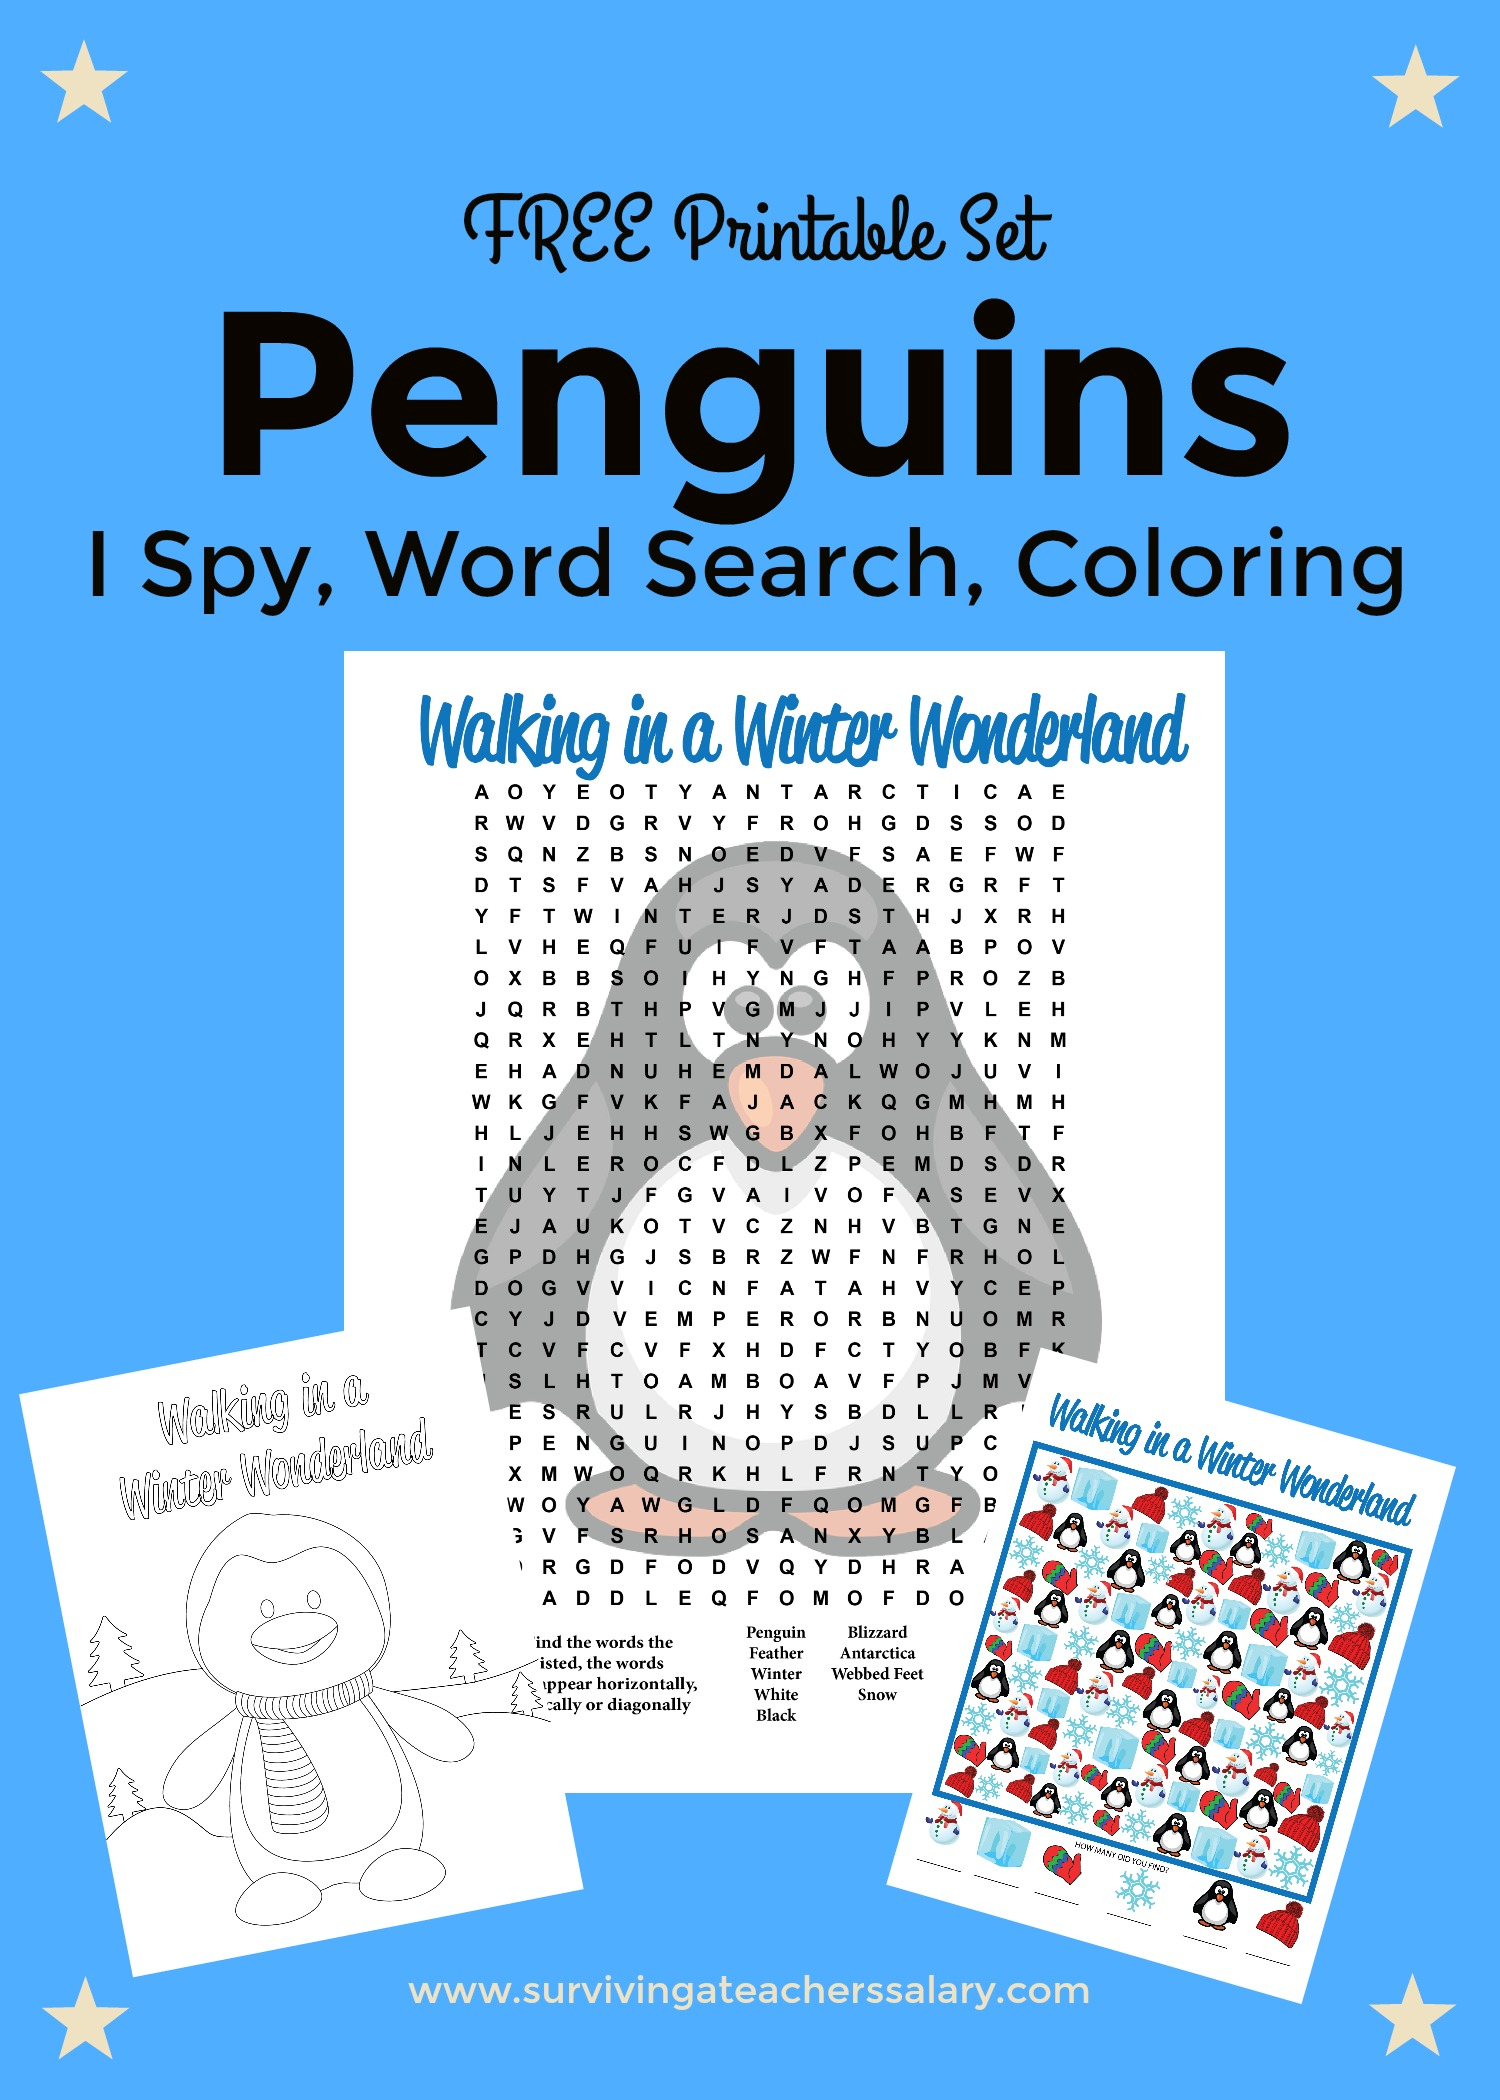 Word Search Coloring Pages To Print Free Printable Penguins Worksheets Coloring Sheet Word Search I Spy